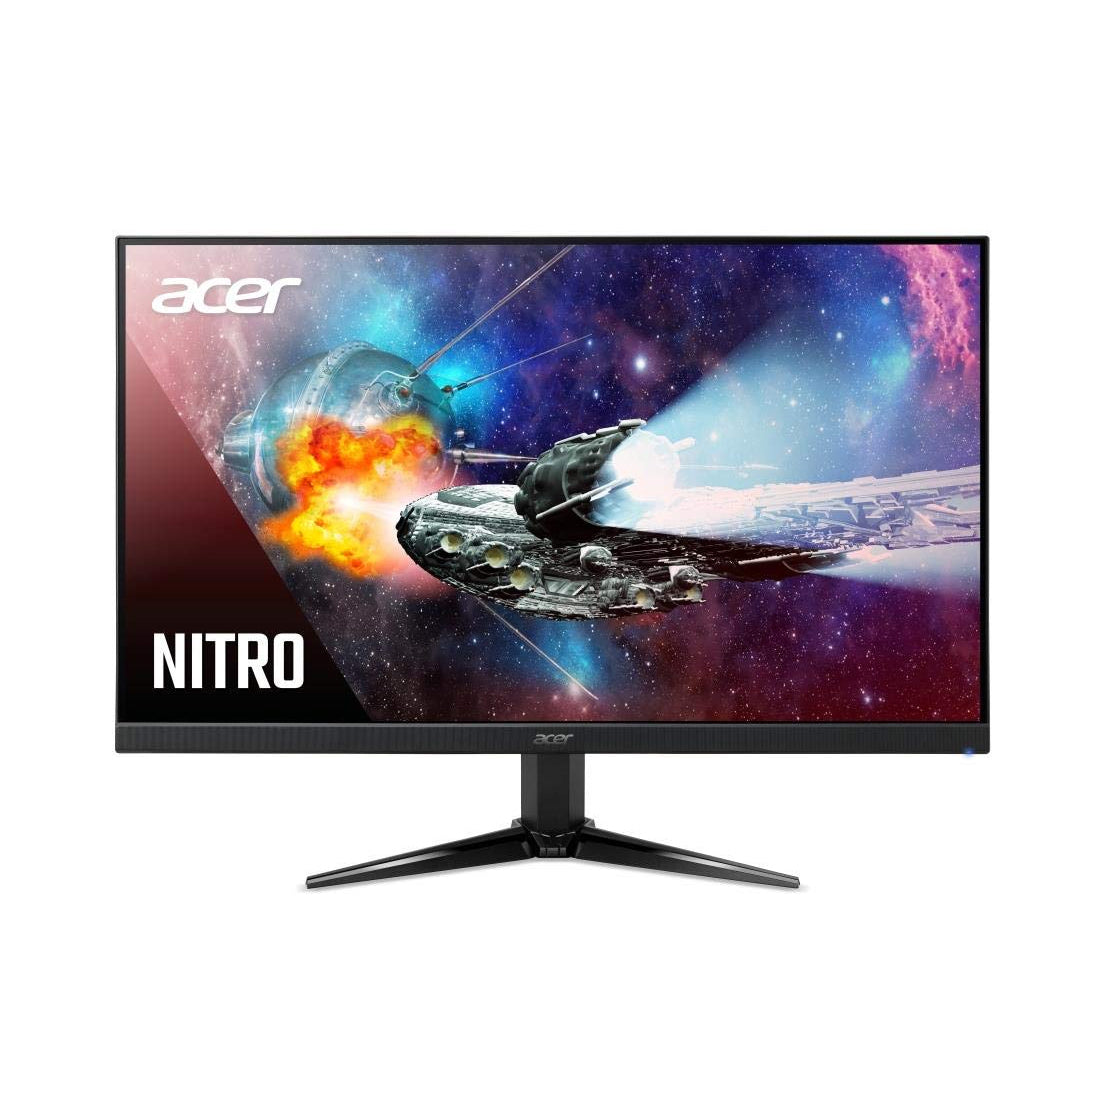 Acer Nitro QG1 27-Inch Full-HD Gaming Monitor with 75Hz Refresh Rate 1MS Response Time and AMD FreeSync